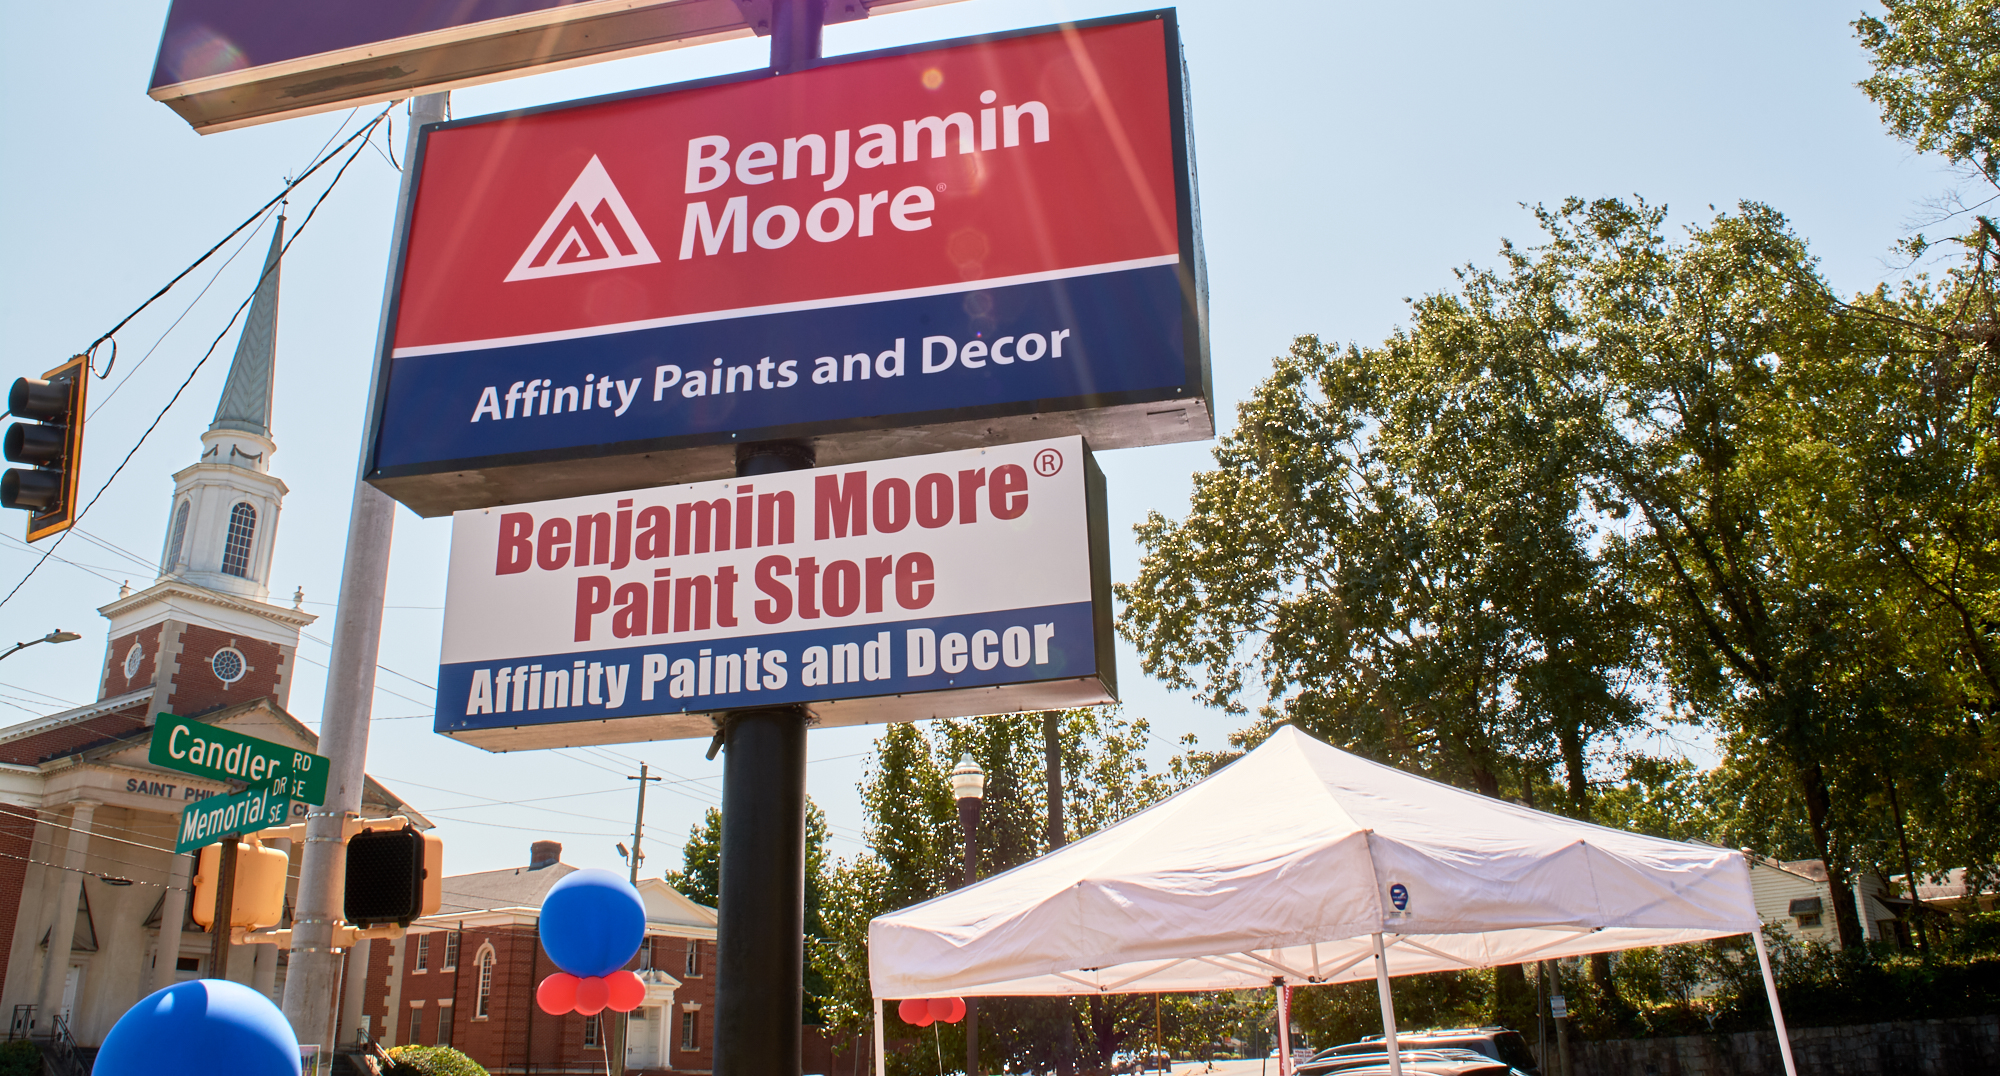 Affinity Paints And Decor - Benjamin Moore Paint Store